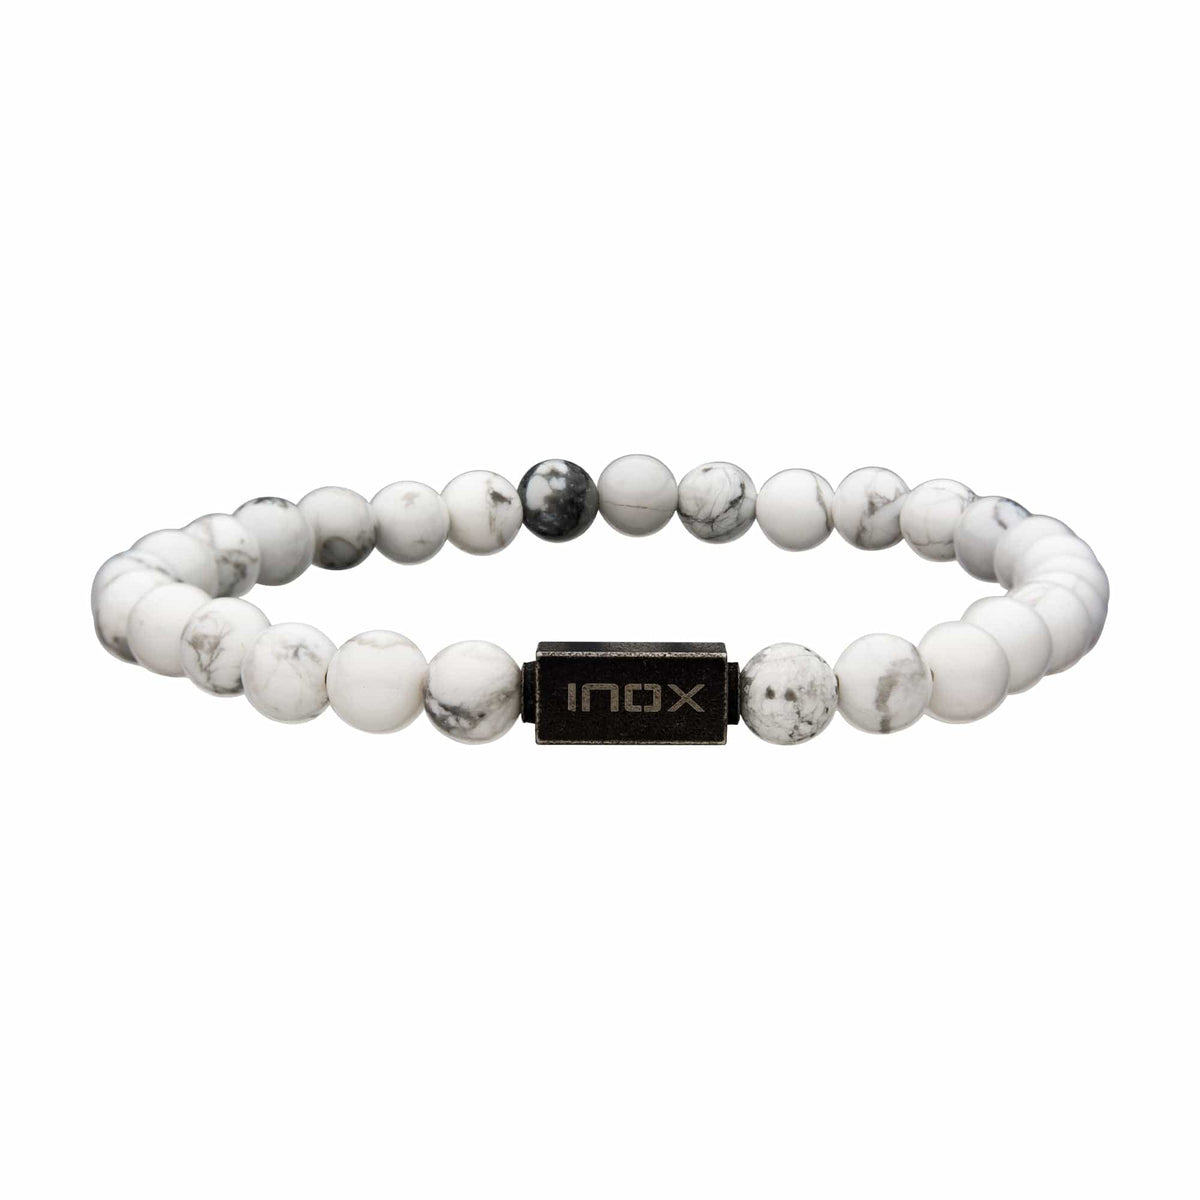 INOX JEWELRY Bracelets Antiqued Silver Tone Stainless Steel Stonehenge Collection 6mm White Howlite Stretch Bead Bracelet BRELWH